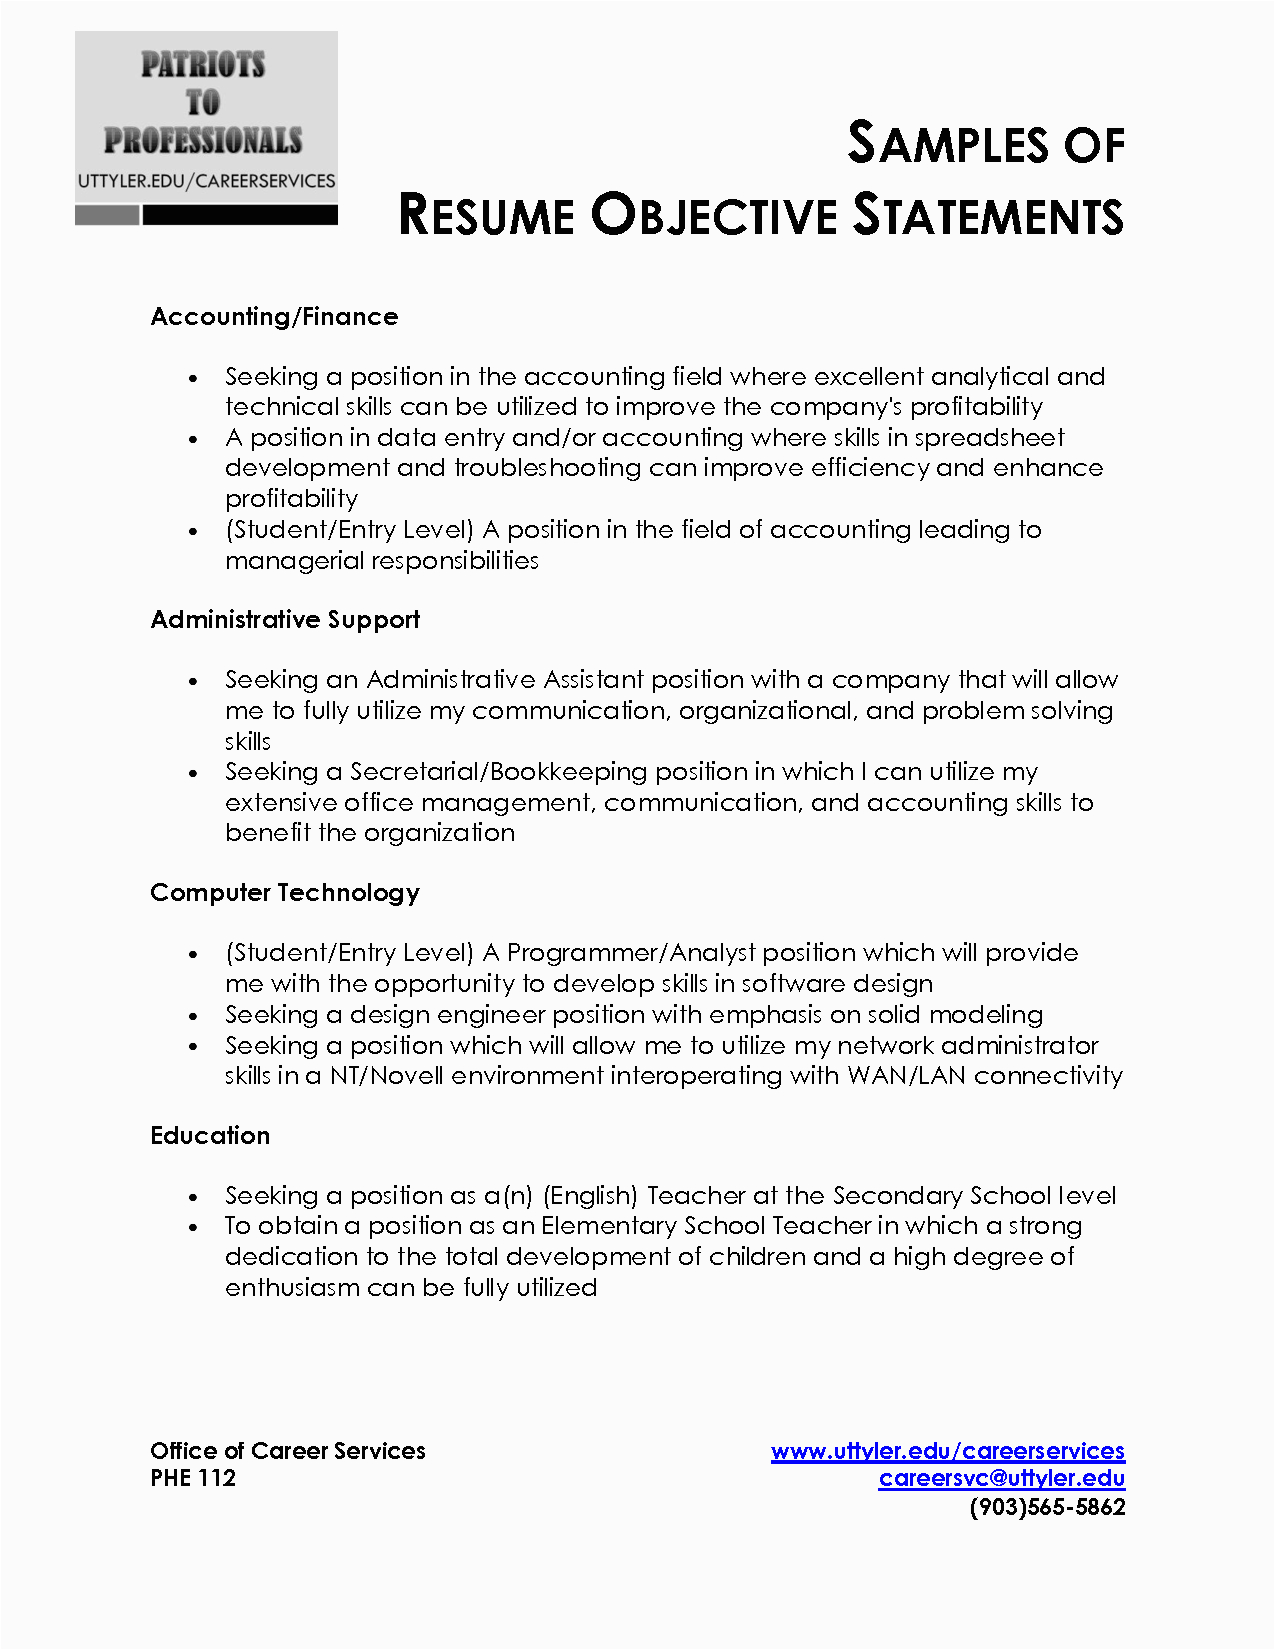 Sample Resume Objectives for On the Job Training Resume Objective Statement